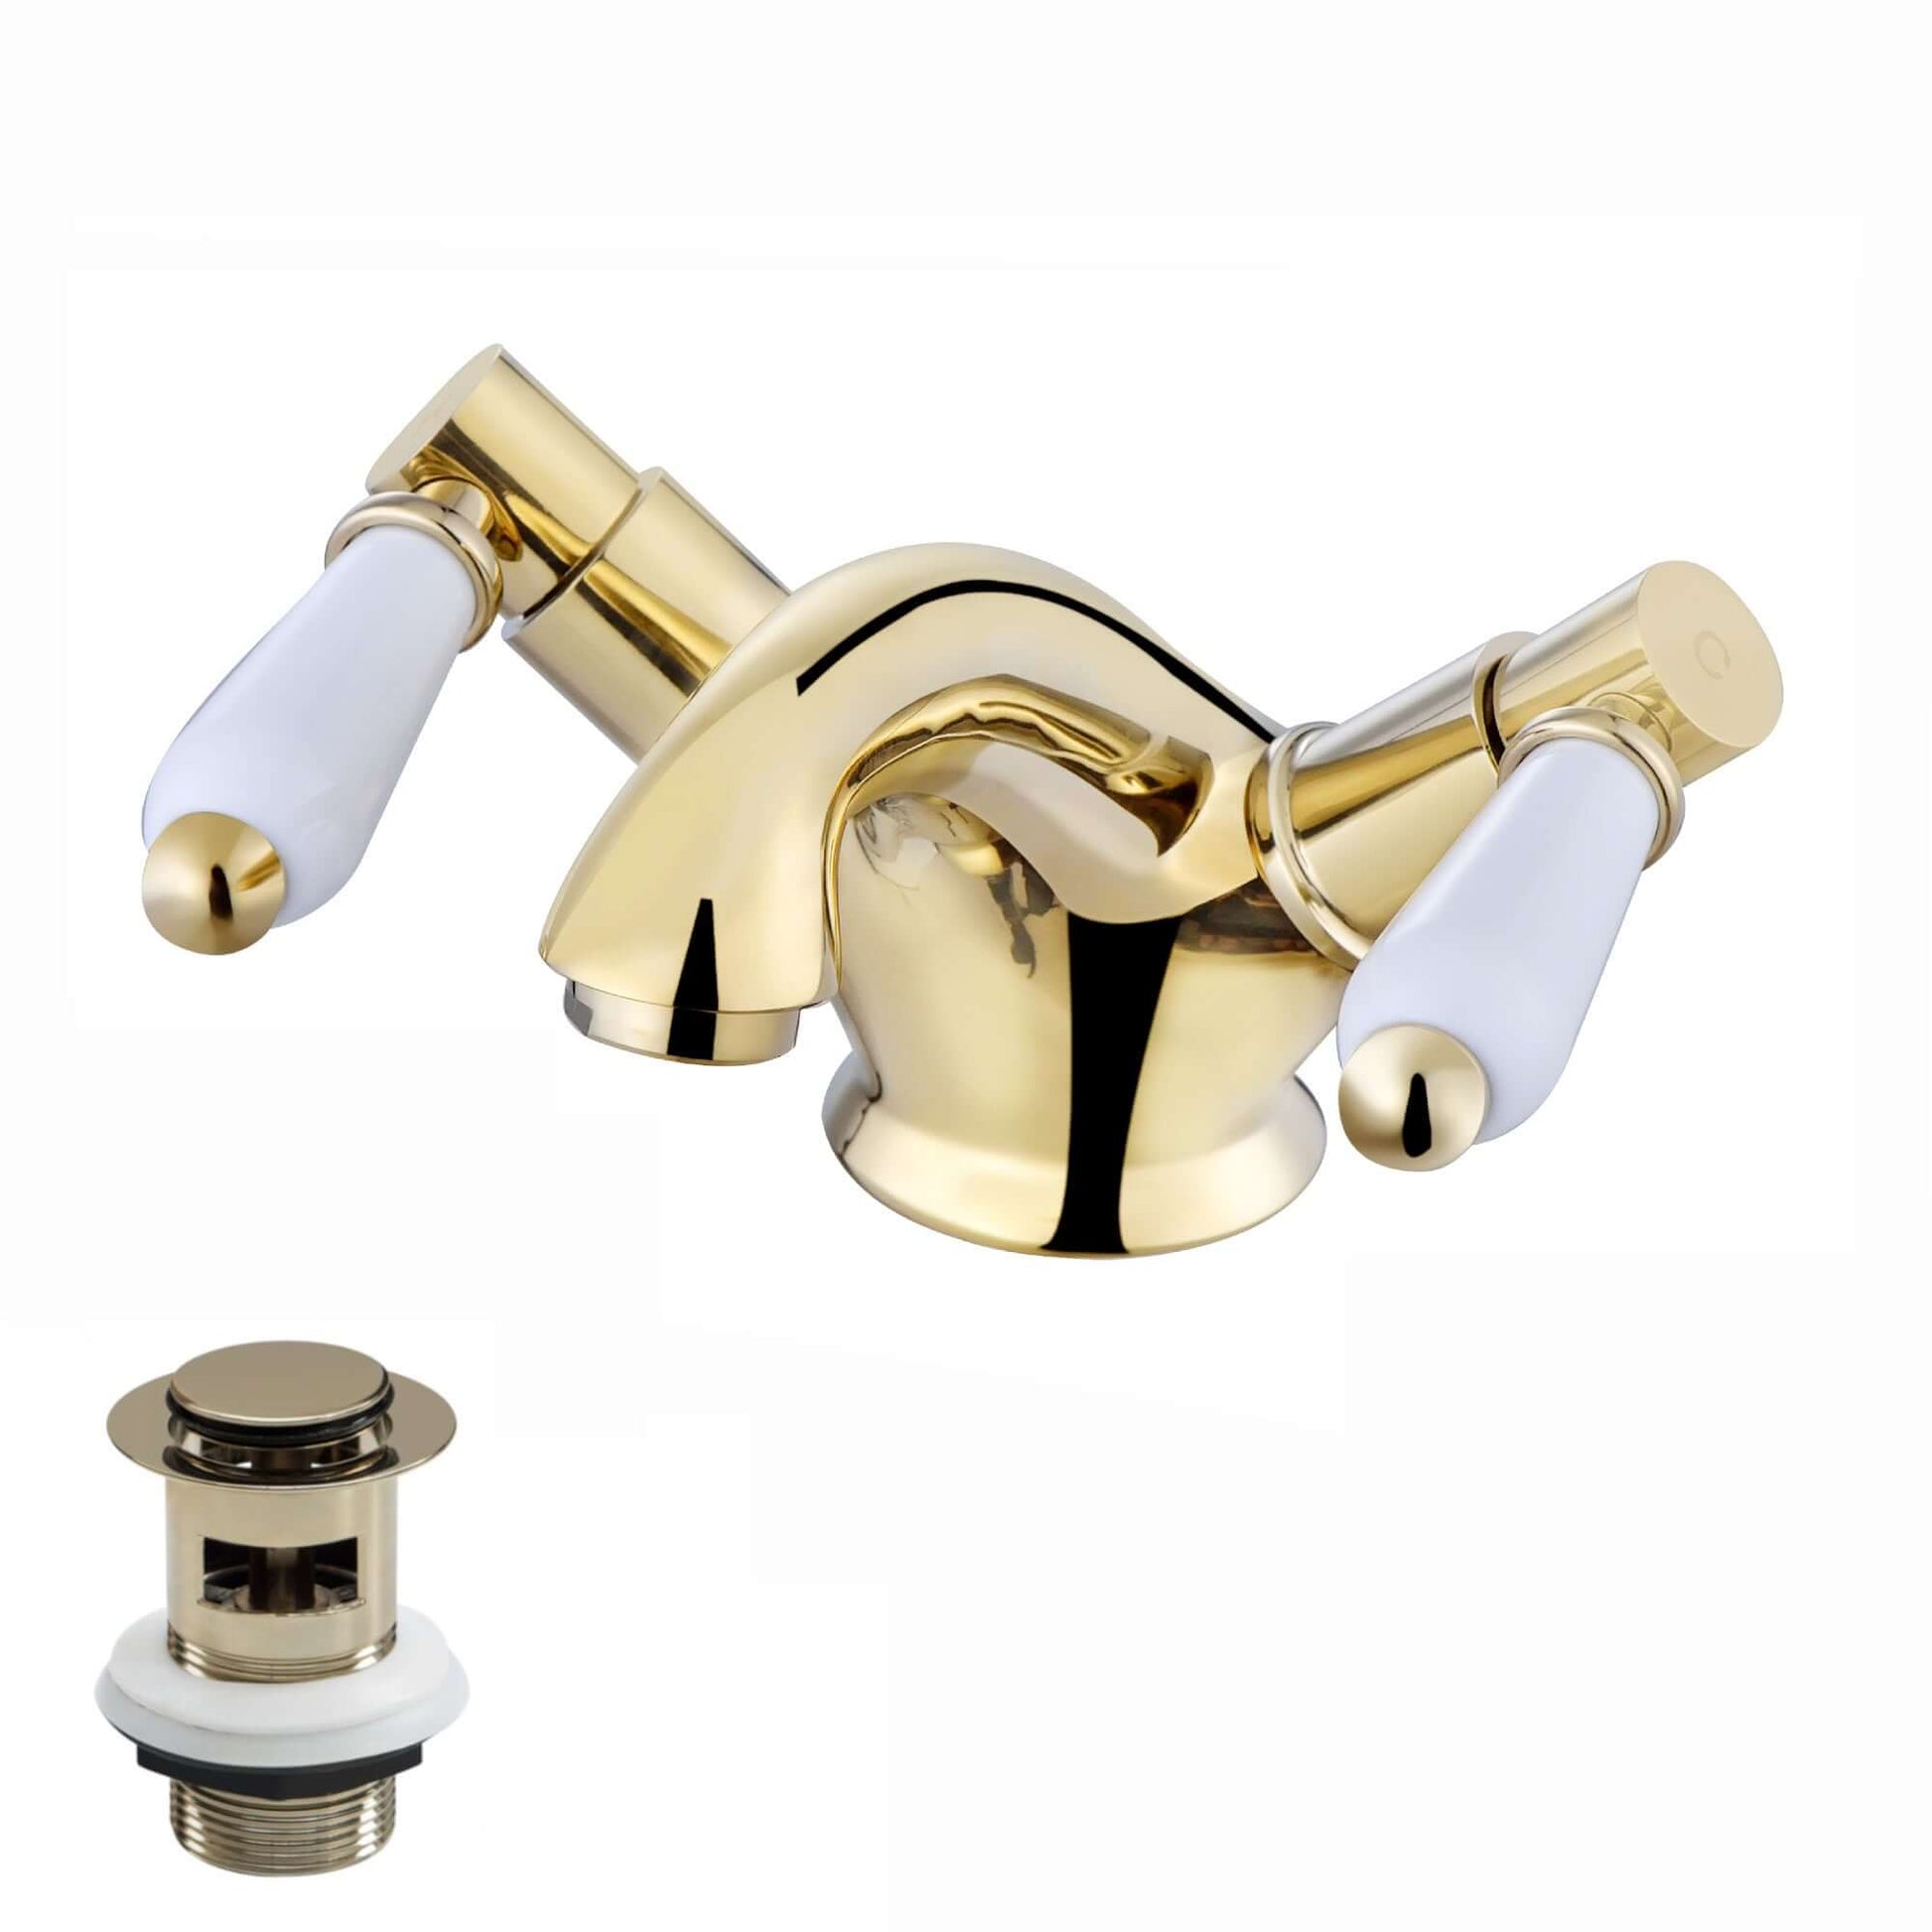 Downton basin mixer tap with white ceramic levers + slotted waste - English gold - Taps